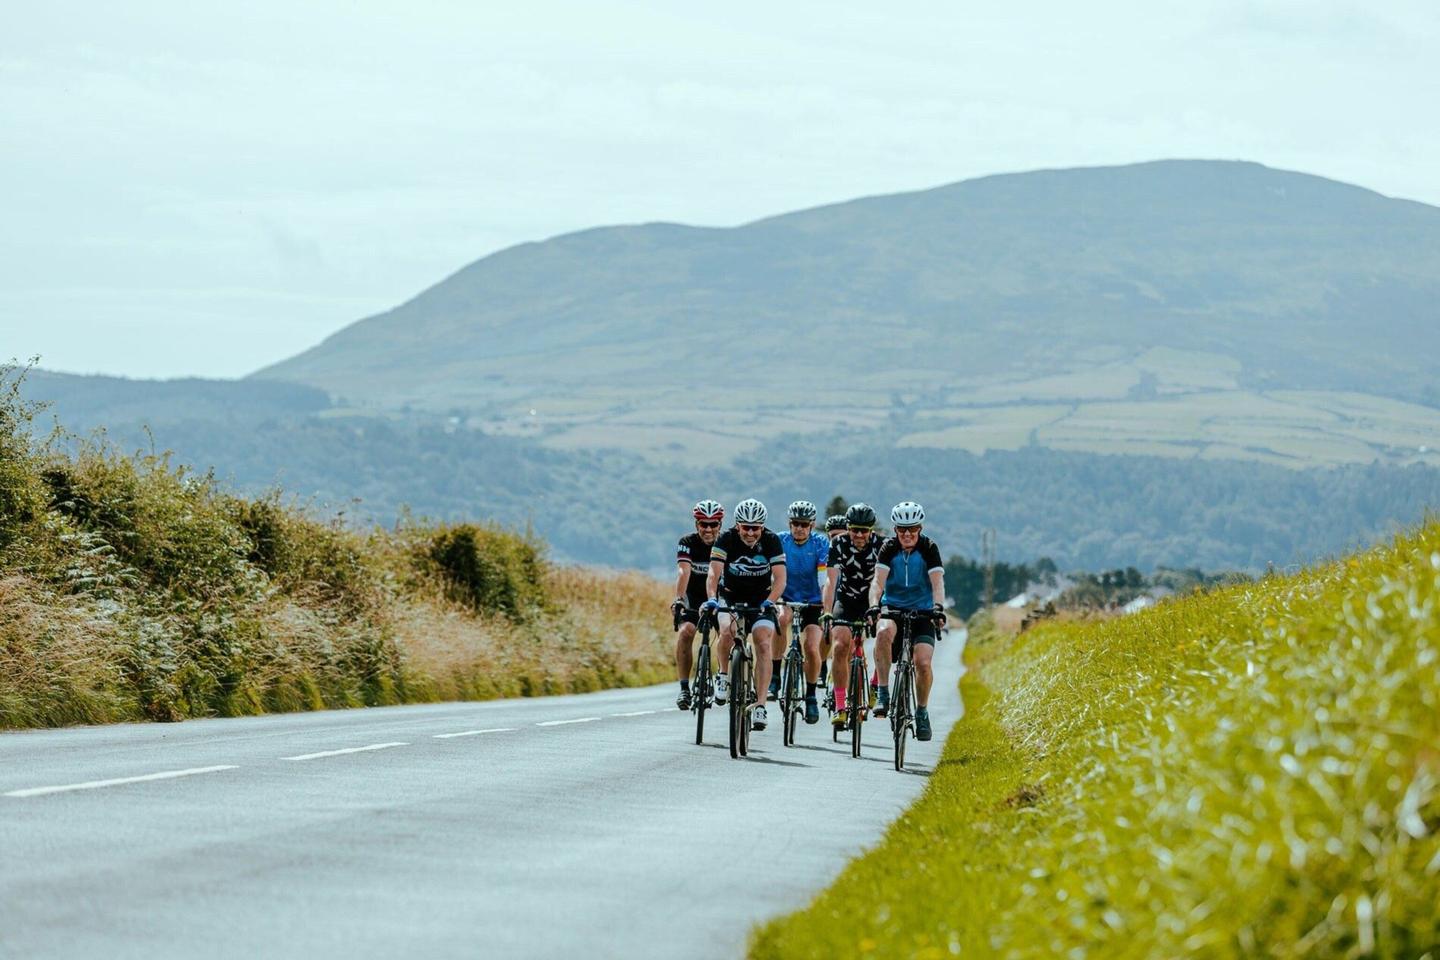 A group of cyclists riding on a road through the countryside in the Isle of Man, with green fields and hills in the background.